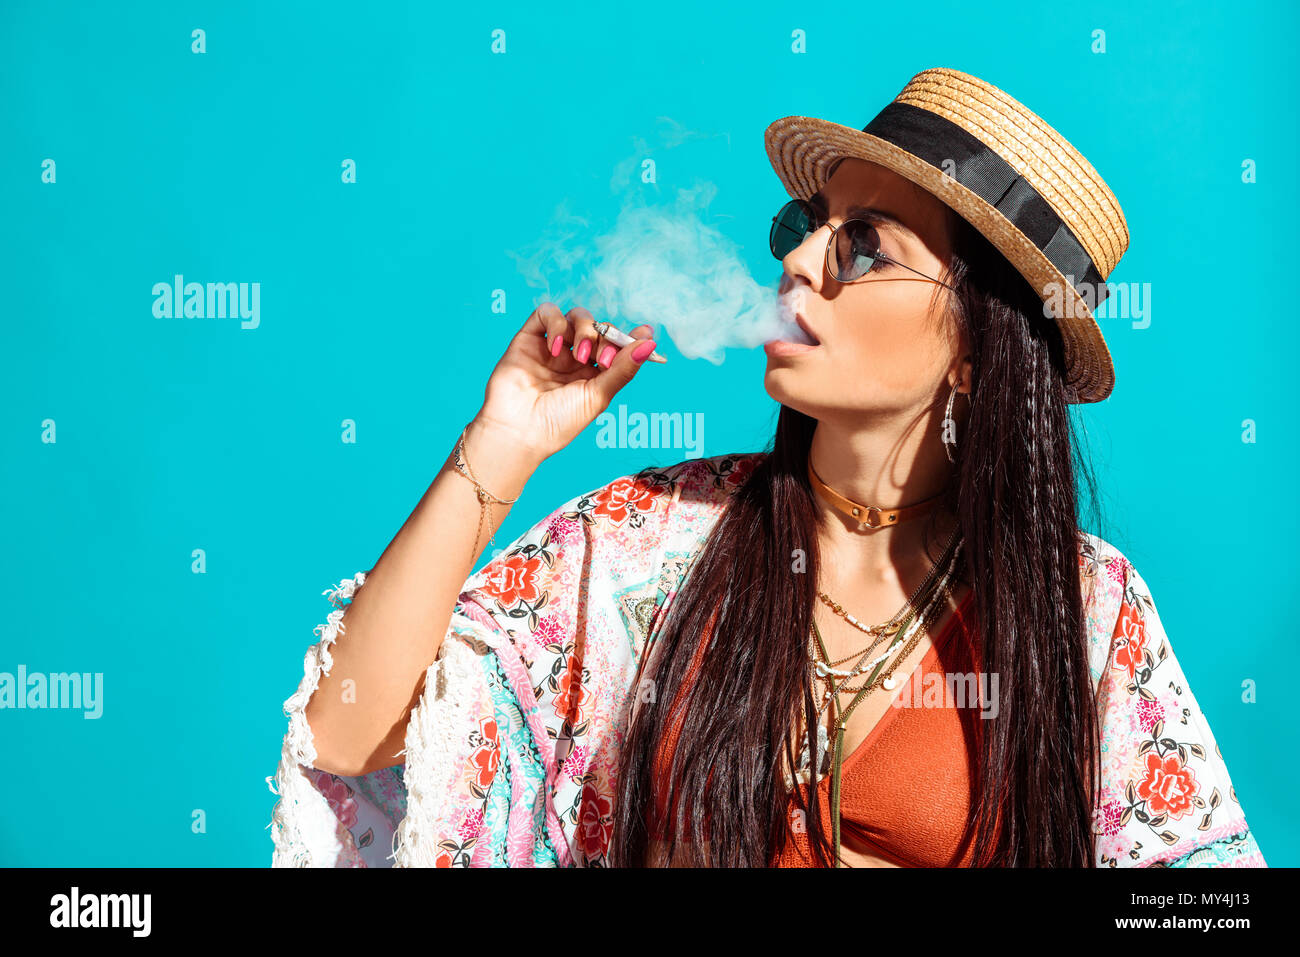 Attractive bohemian girl smoking cigarette and exhaling smoke isolated on turquoise Stock Photo